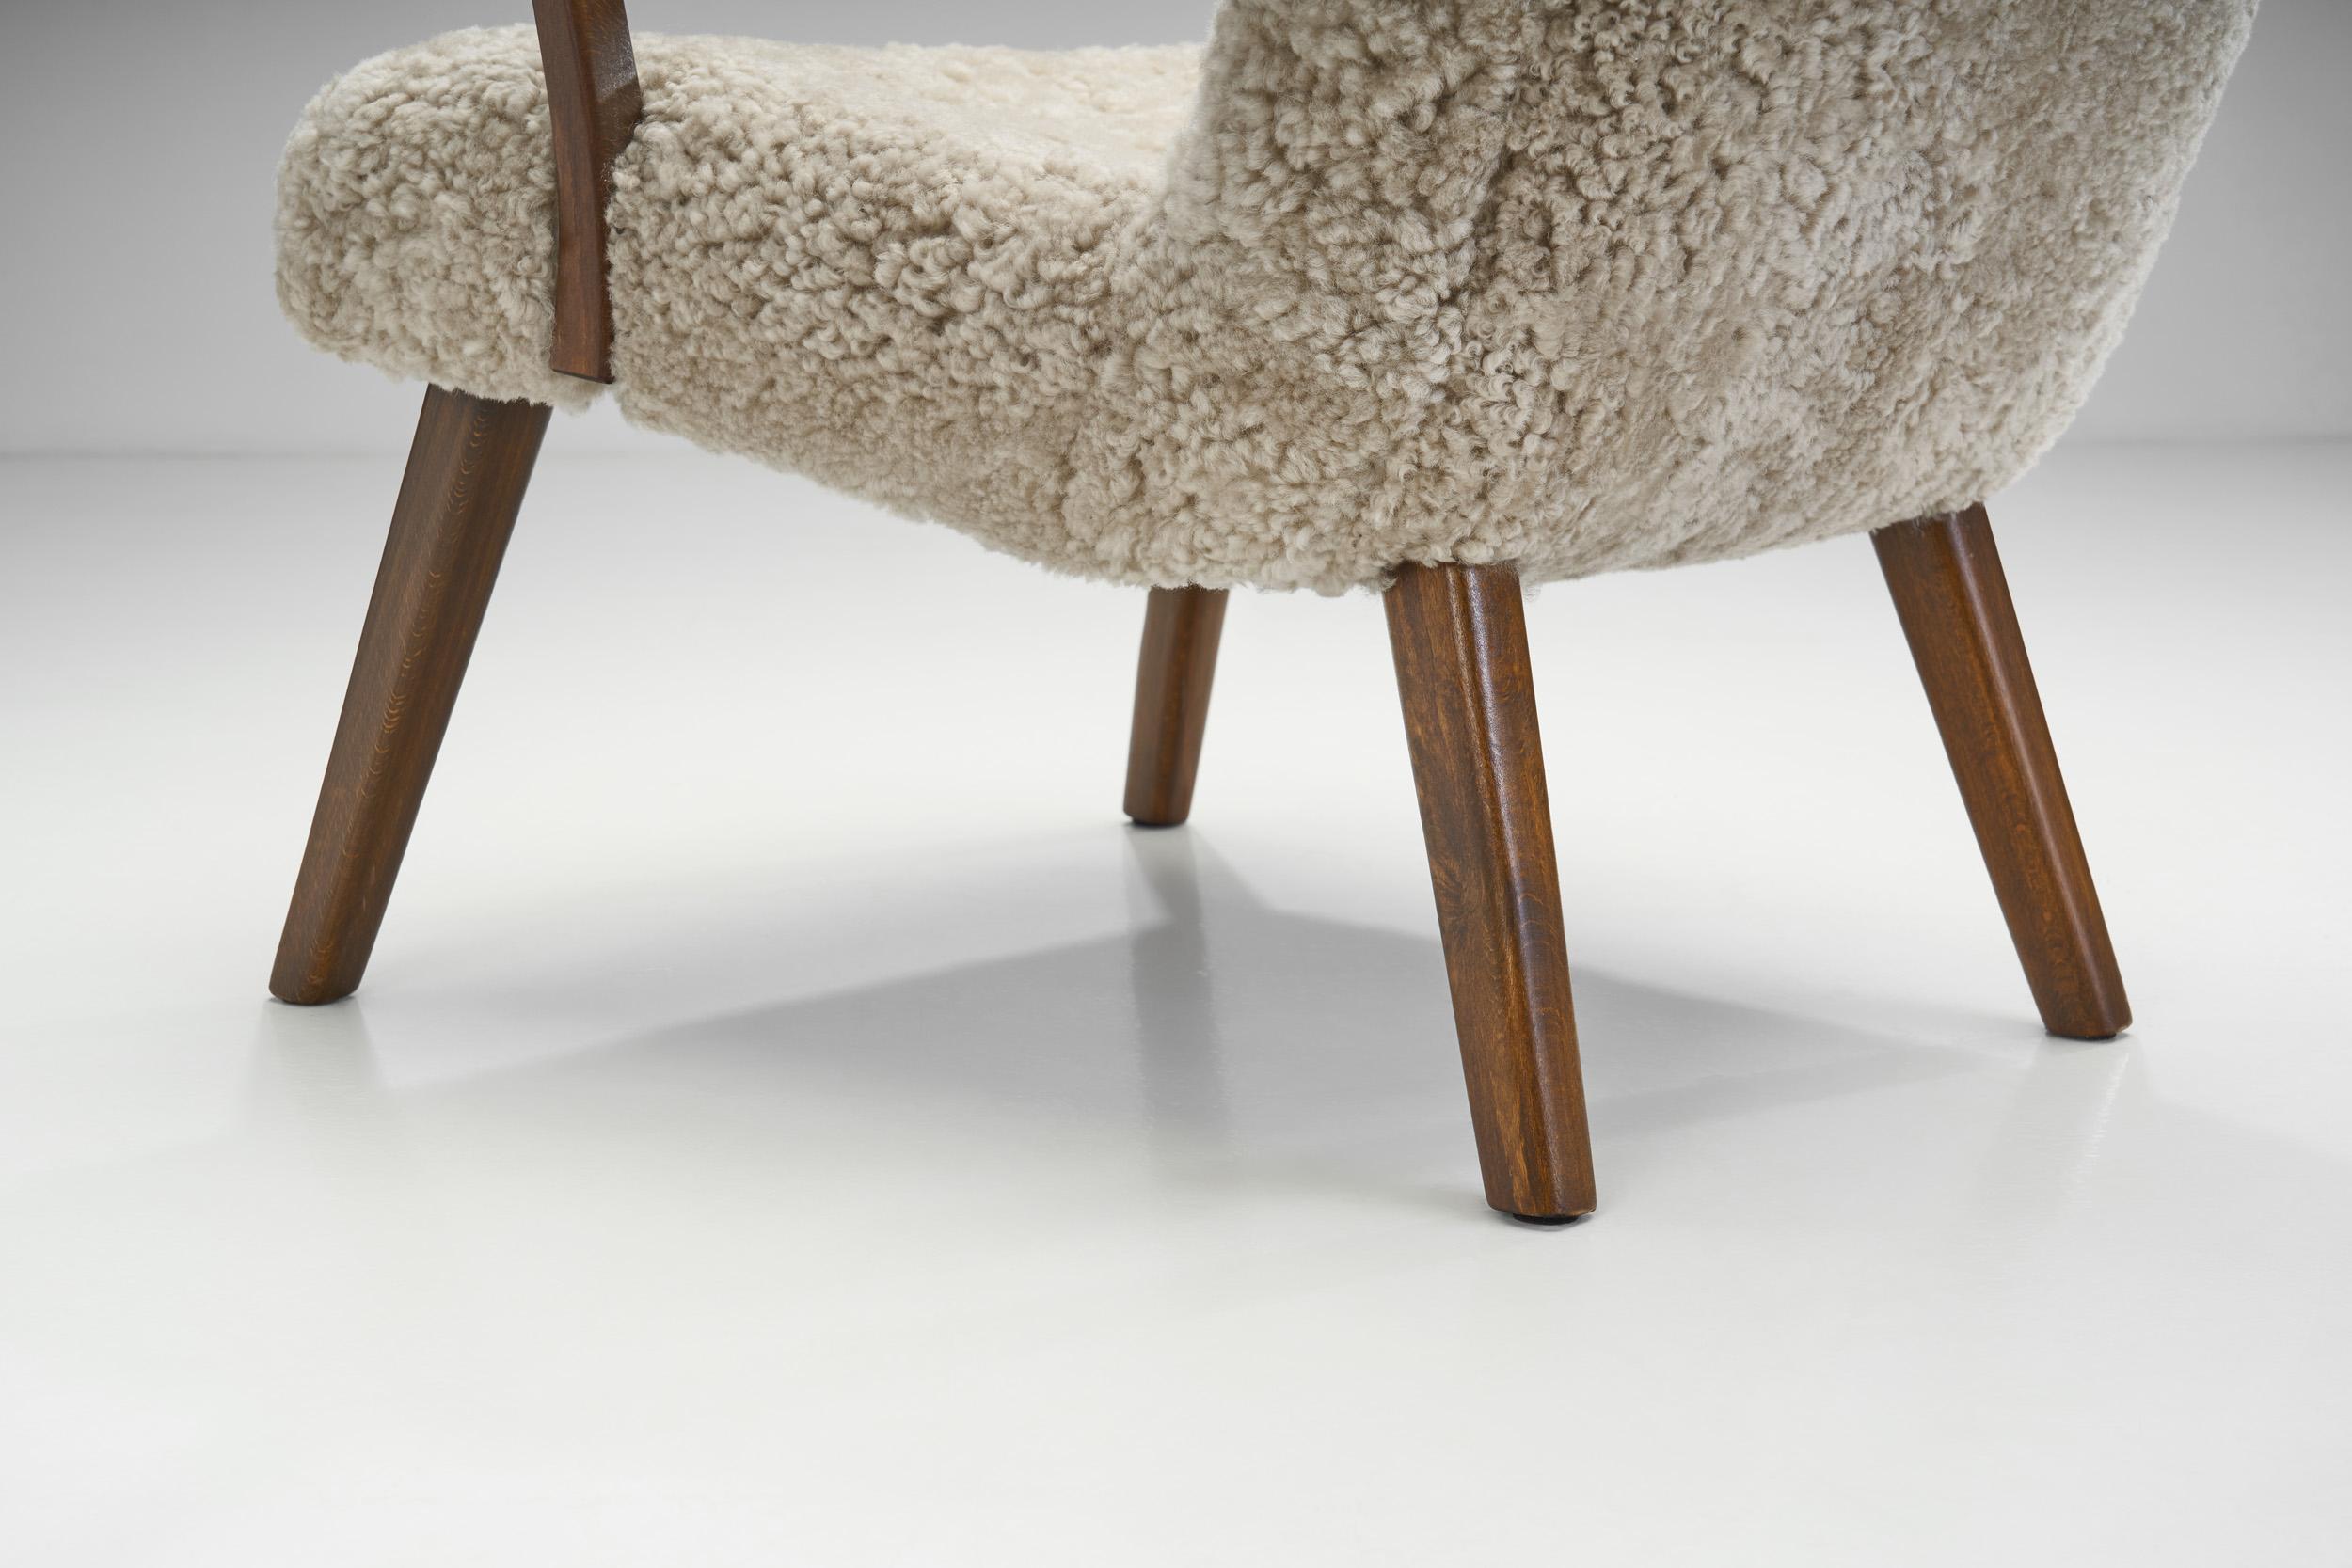 Stained Beech Easy Chairs in Sheepskin by a Danish Cabinetmaker, Denmark 1940s For Sale 10